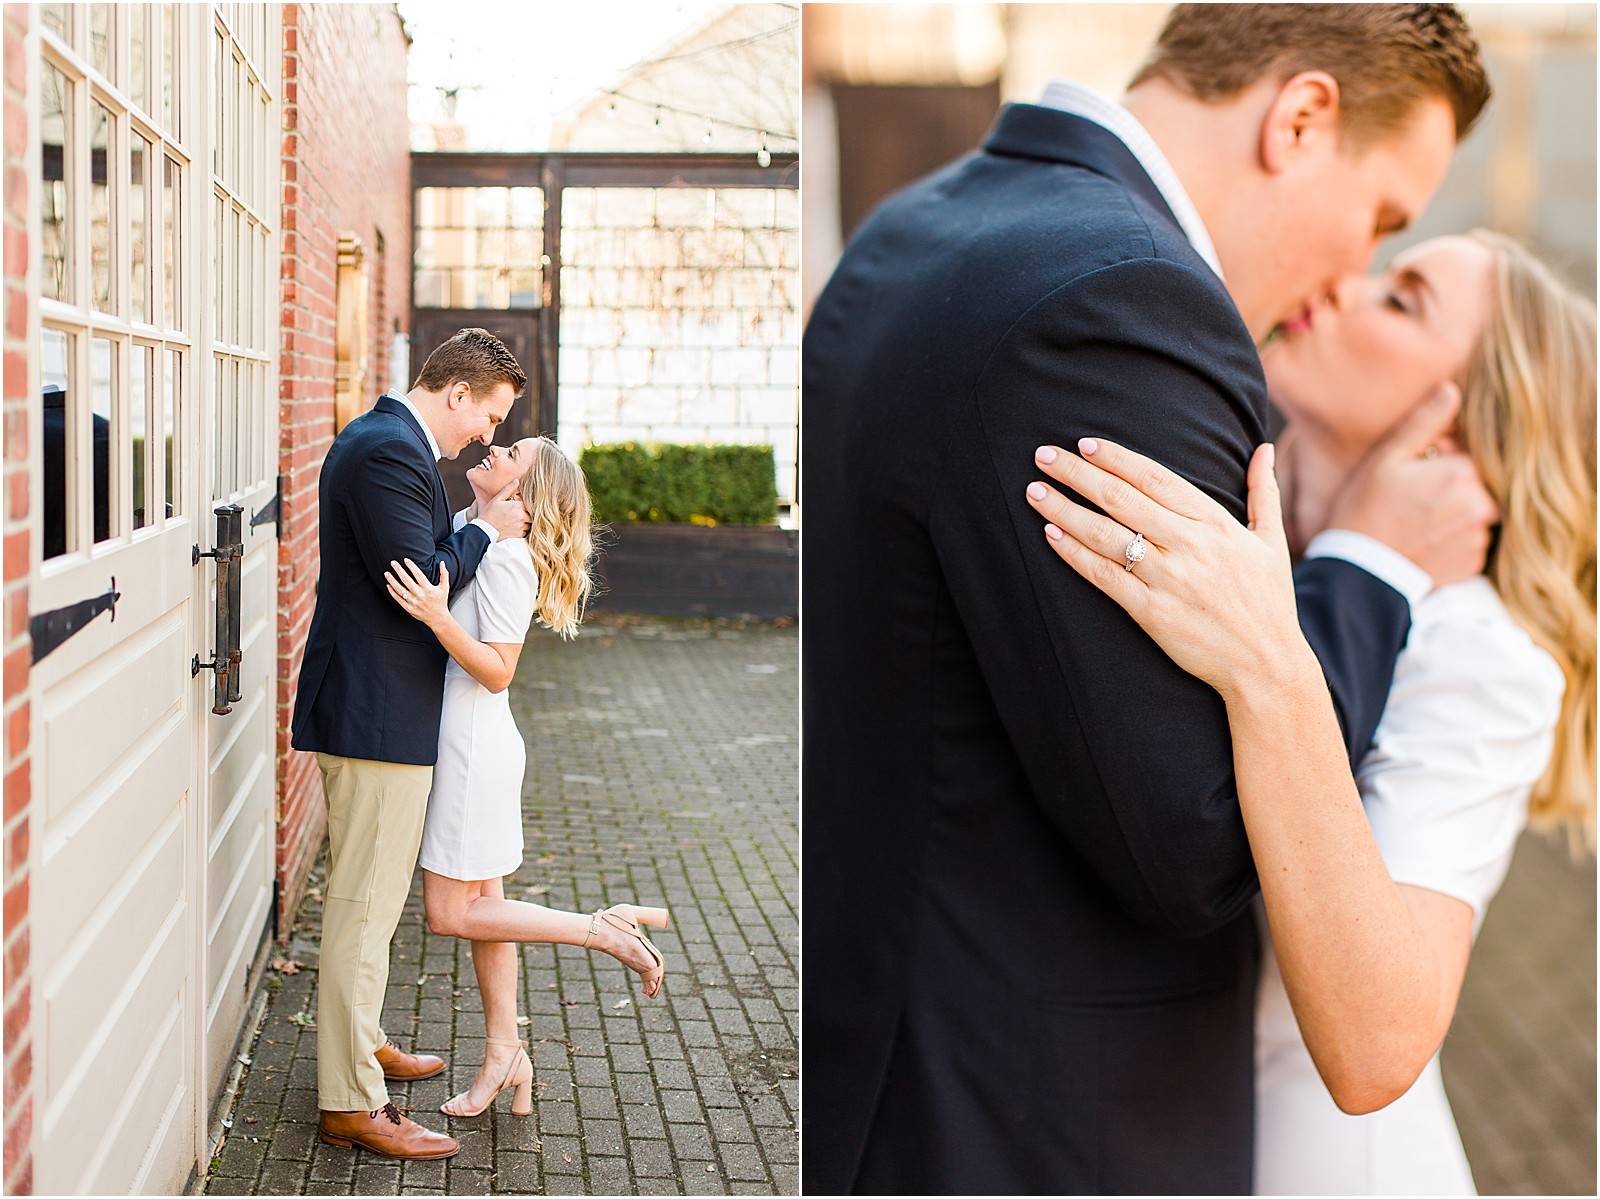 Madison and Christaan | A 20 West Engagement Session in Downto wn Newburgh | Bret and Brandie Photography014.jpg